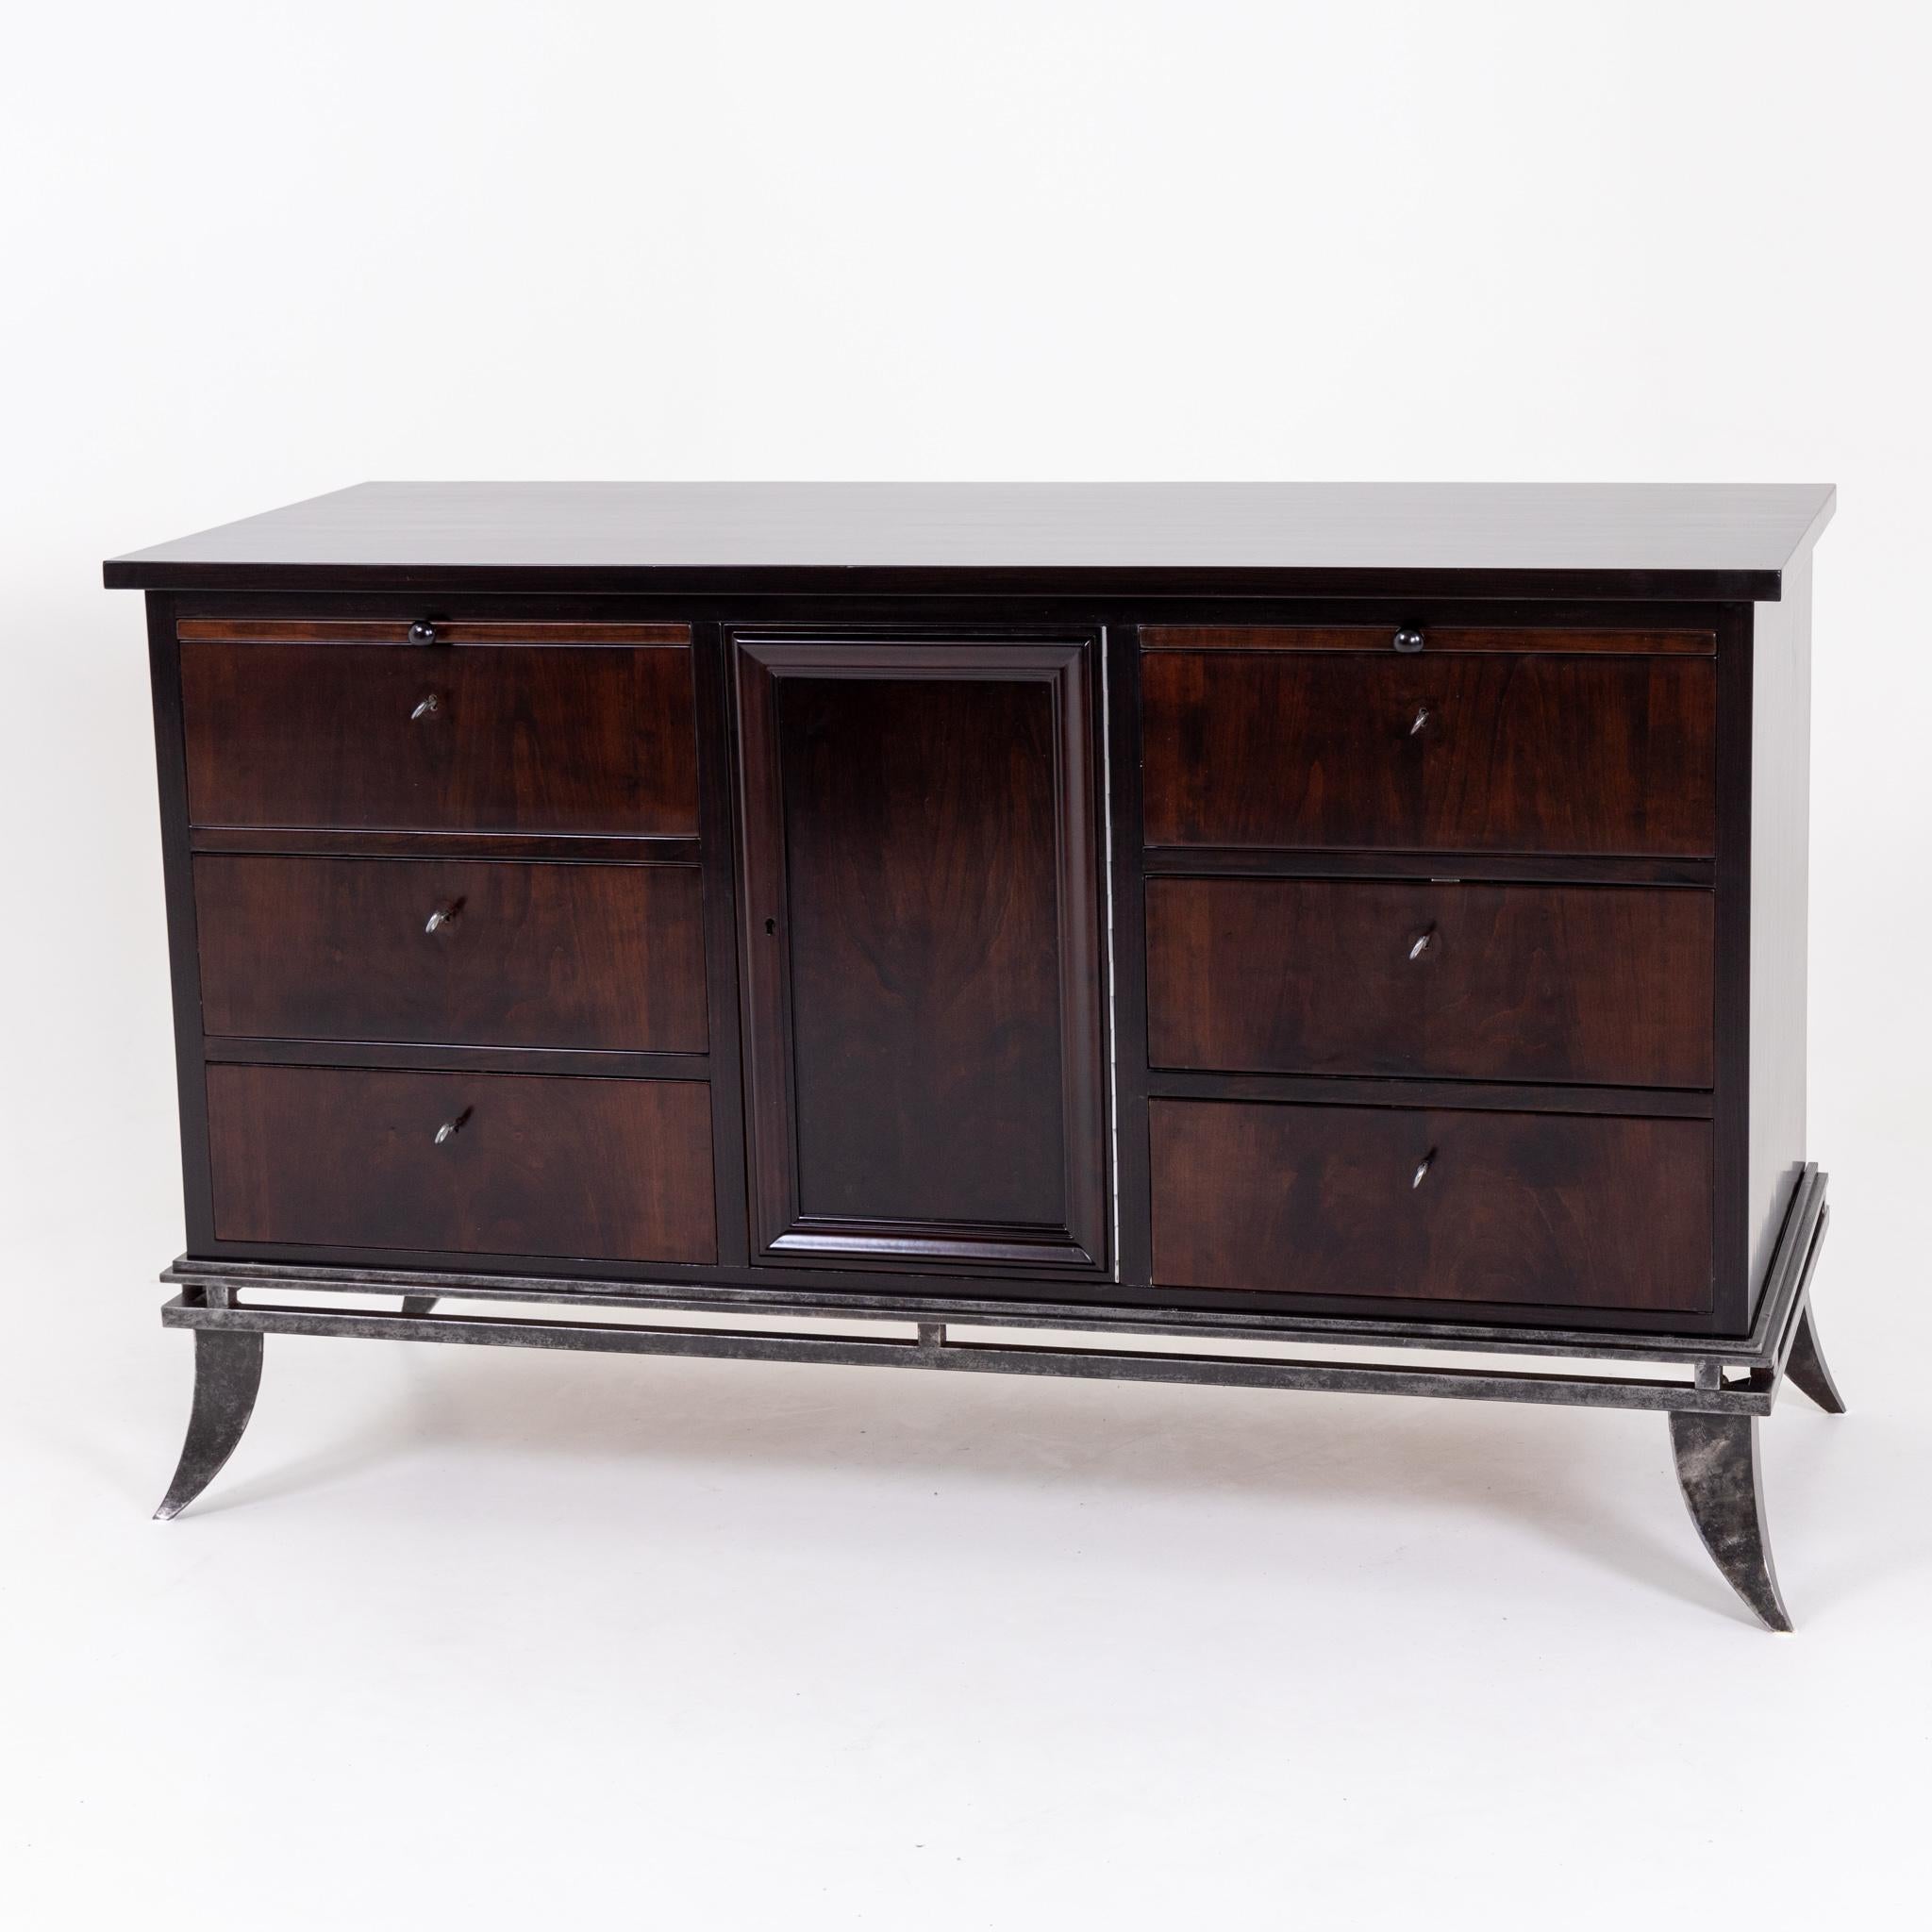 Sideboard on elegant iron frame with flared saber legs, six drawers and one door. Above the drawers can be pulled out more countertops.